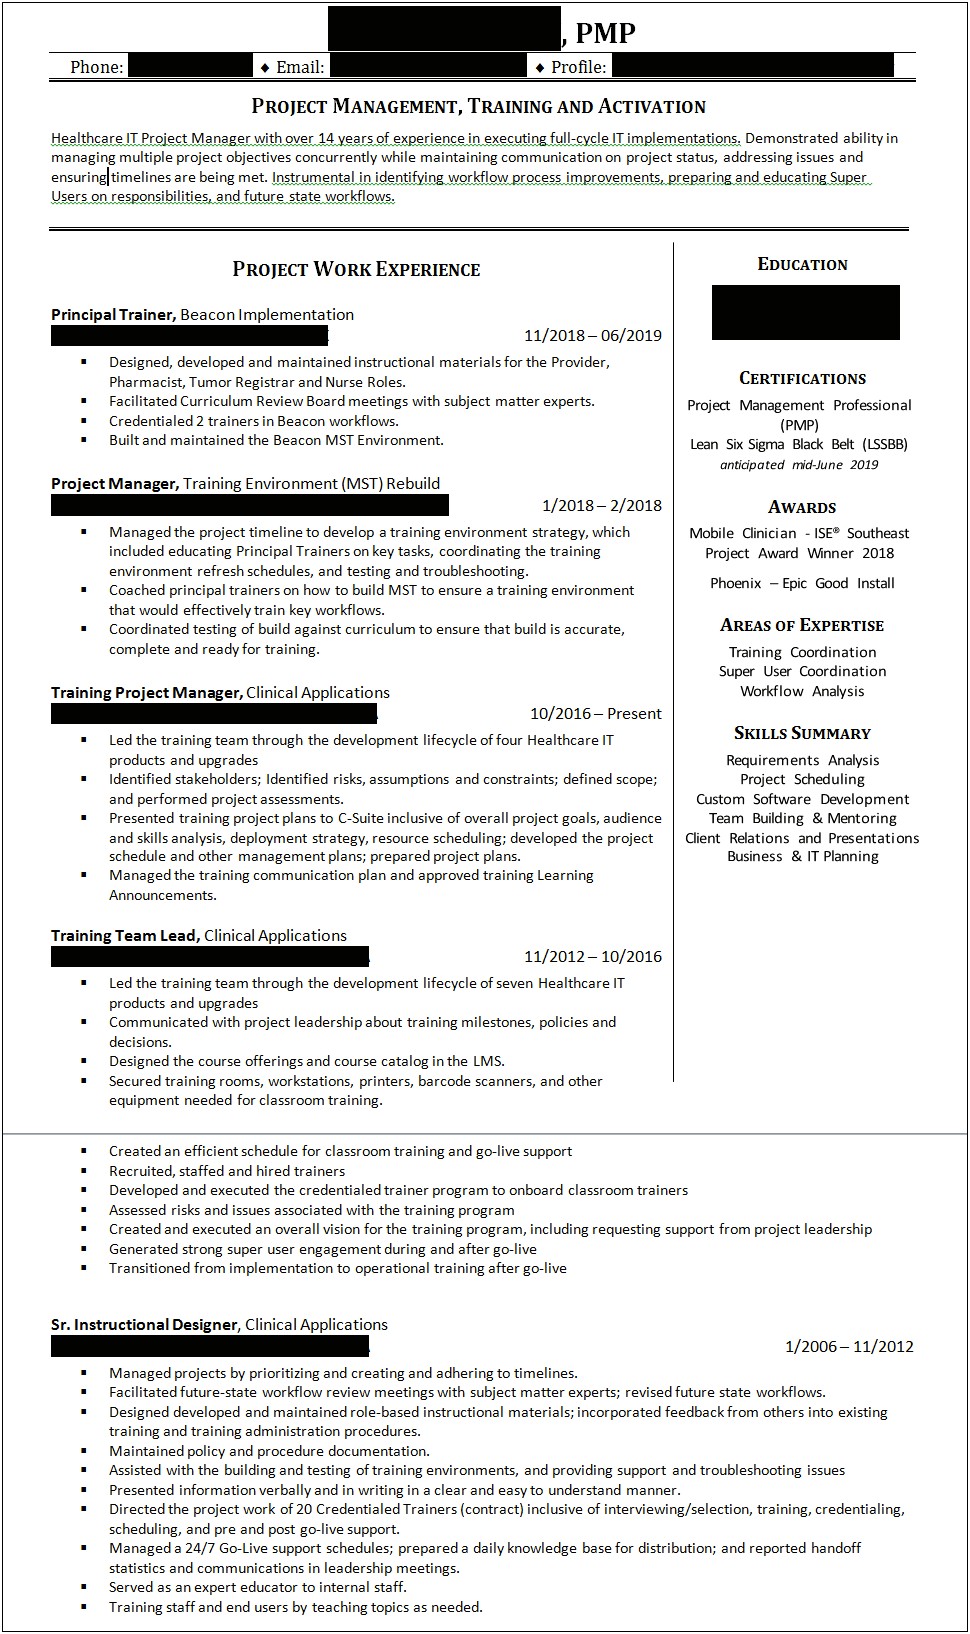 Project Manager Resume Samples 2019